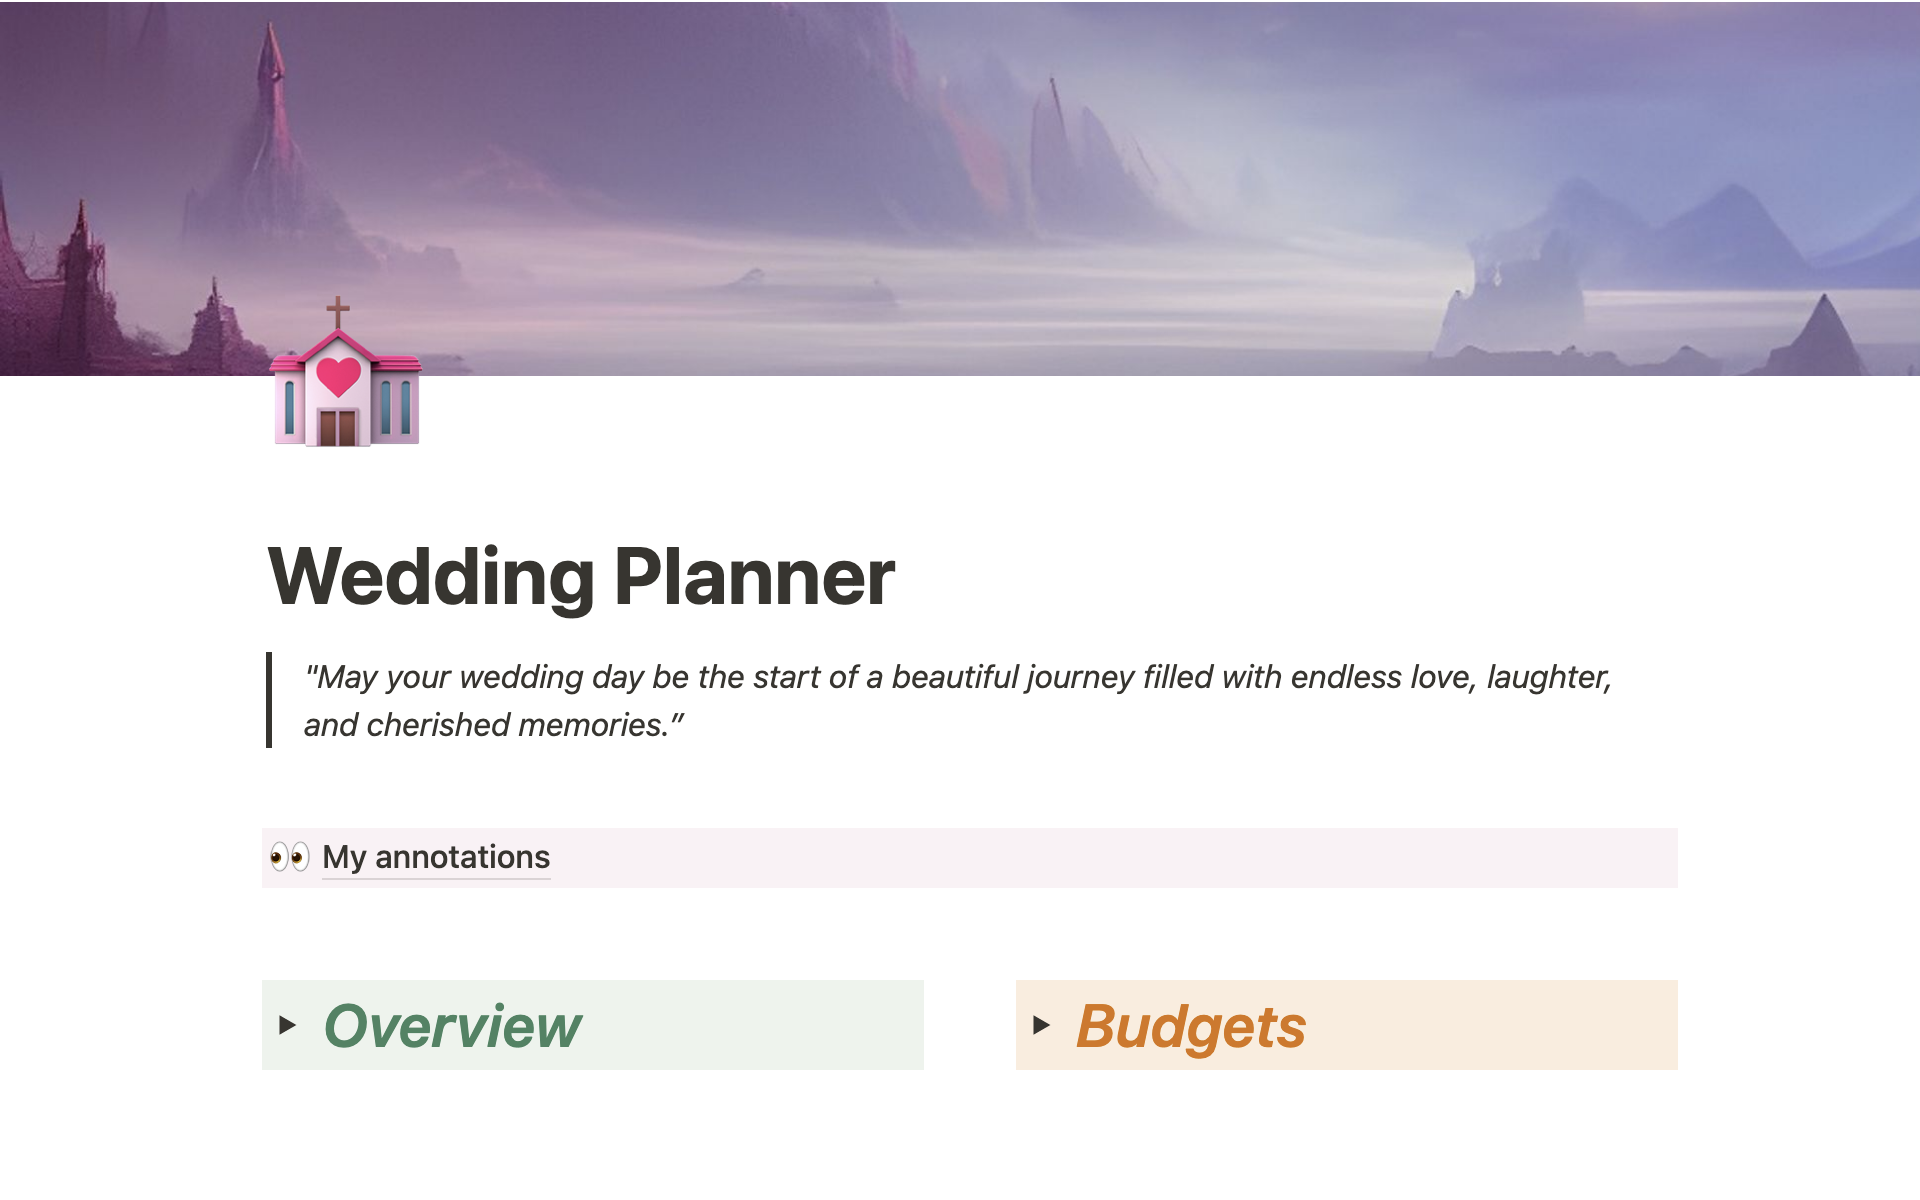 This product is a Notion wedding planning template designed to help organize and streamline the wedding planning process.